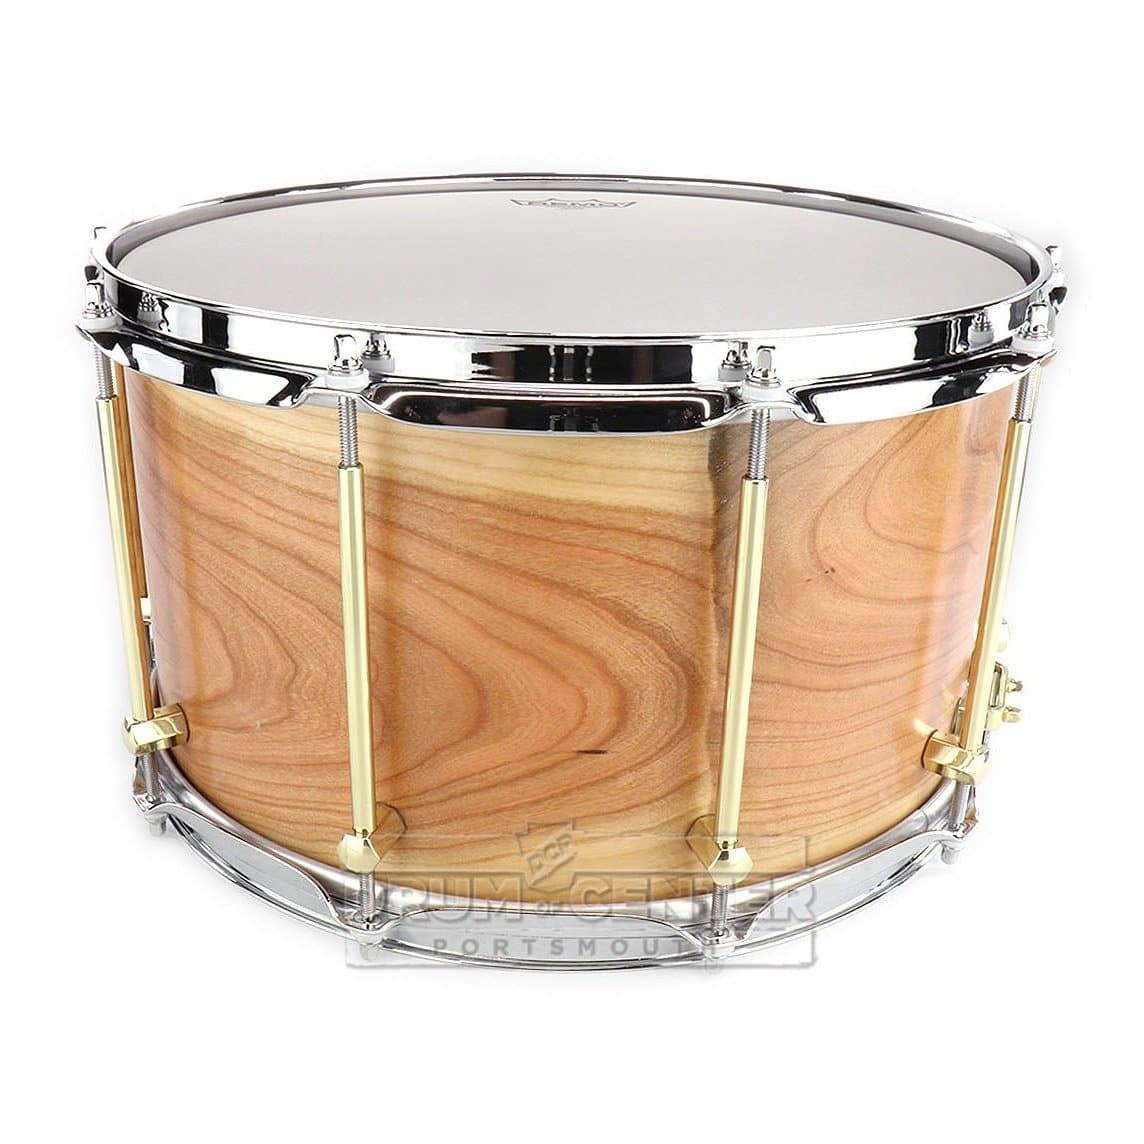 Noble & Cooley Solid Shell Classic Cherry Snare Drum 14x8 Natural Oil